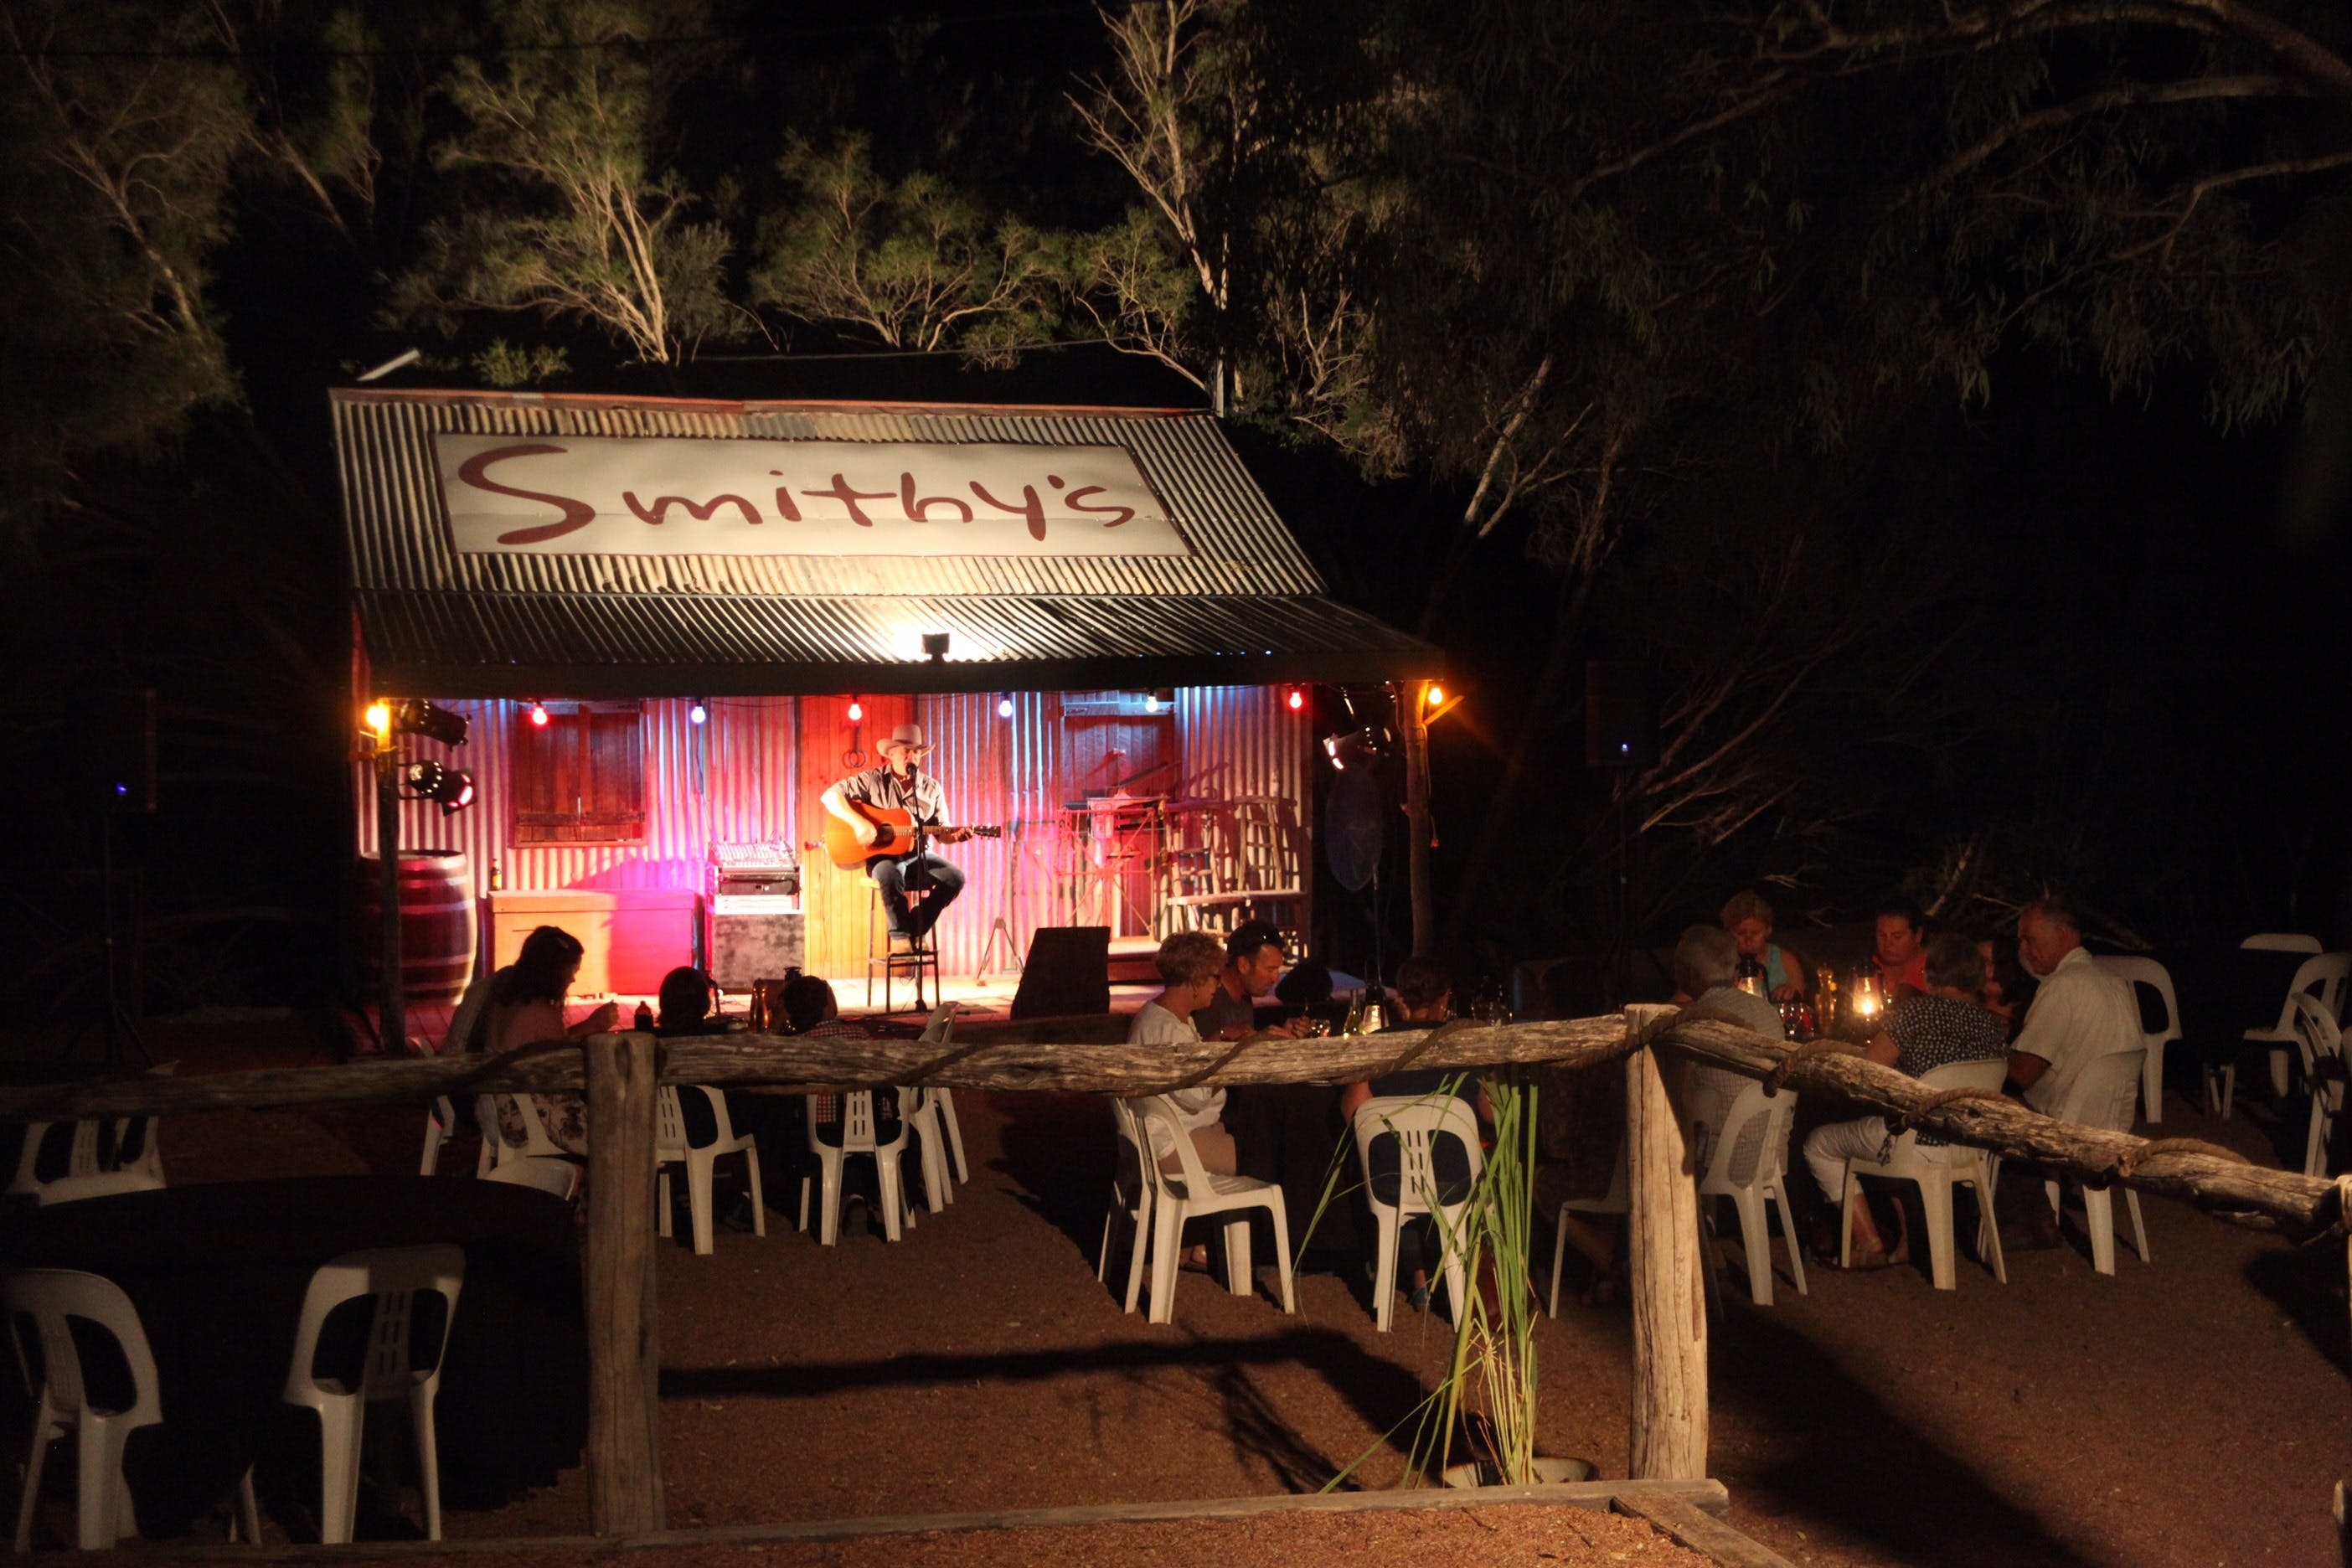 Smithy's Outback Dinner and Show - Surfers Gold Coast